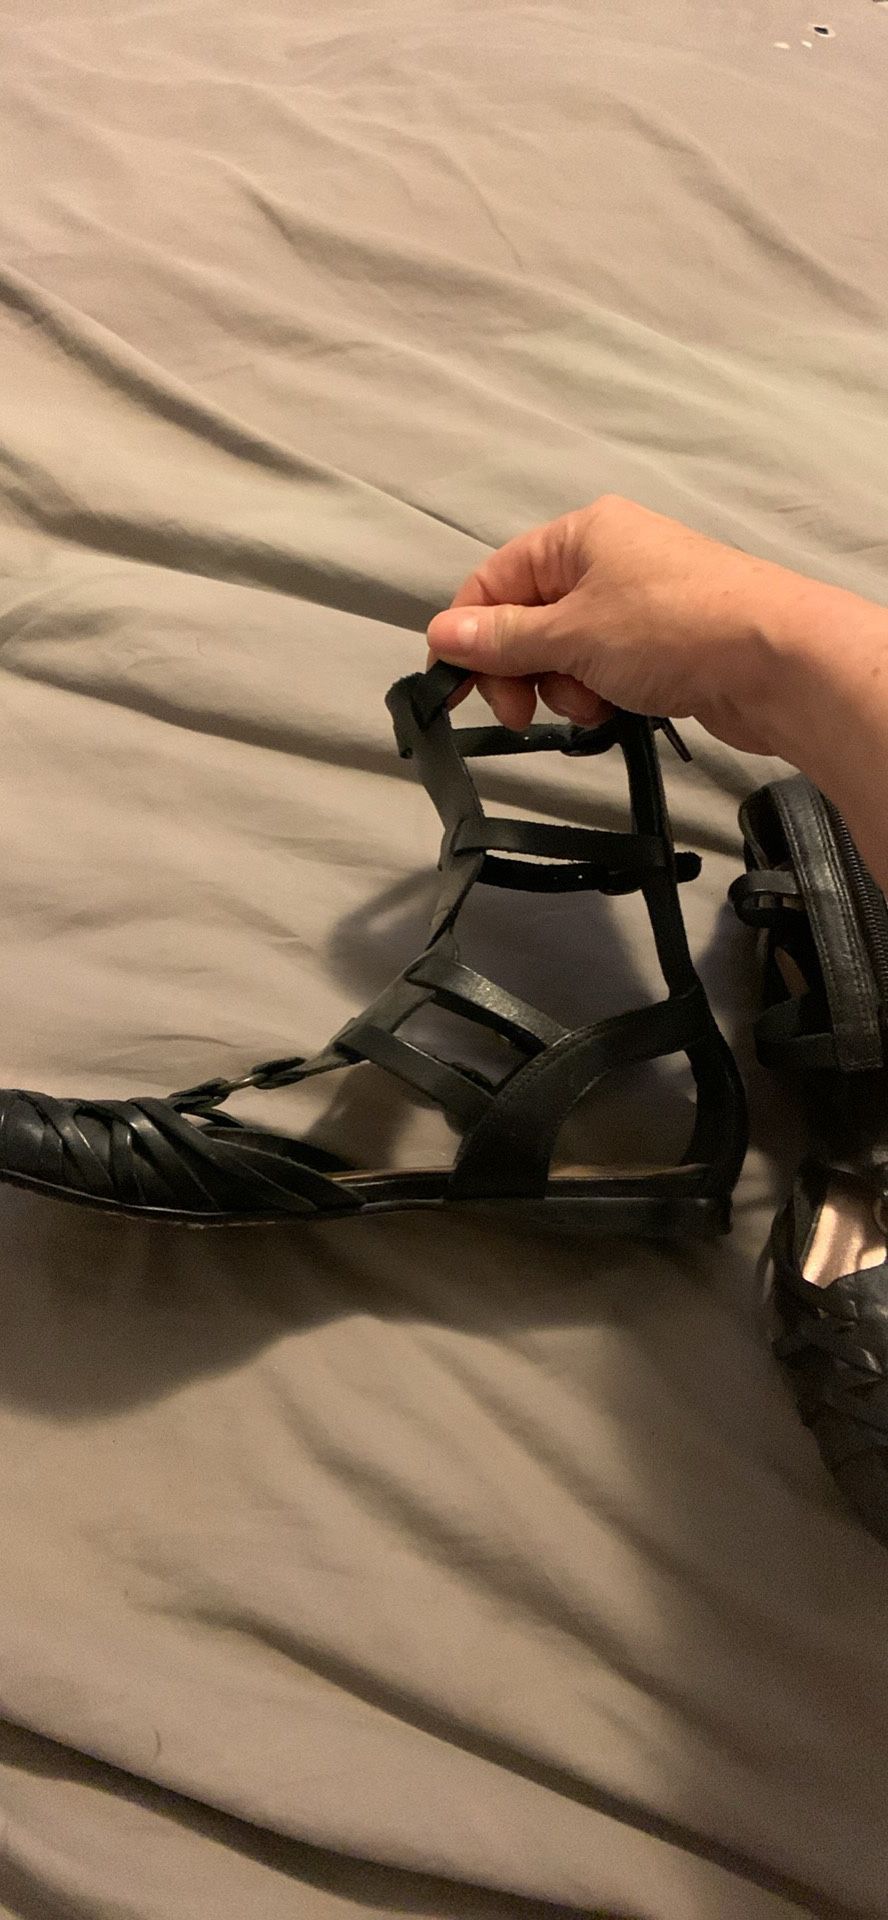 Ladies Shoes..Designer Black Leather Gladiator Sandal With Back Zipper By Brazilian Brand Bronx Size 36 European Size And 6 American Size 